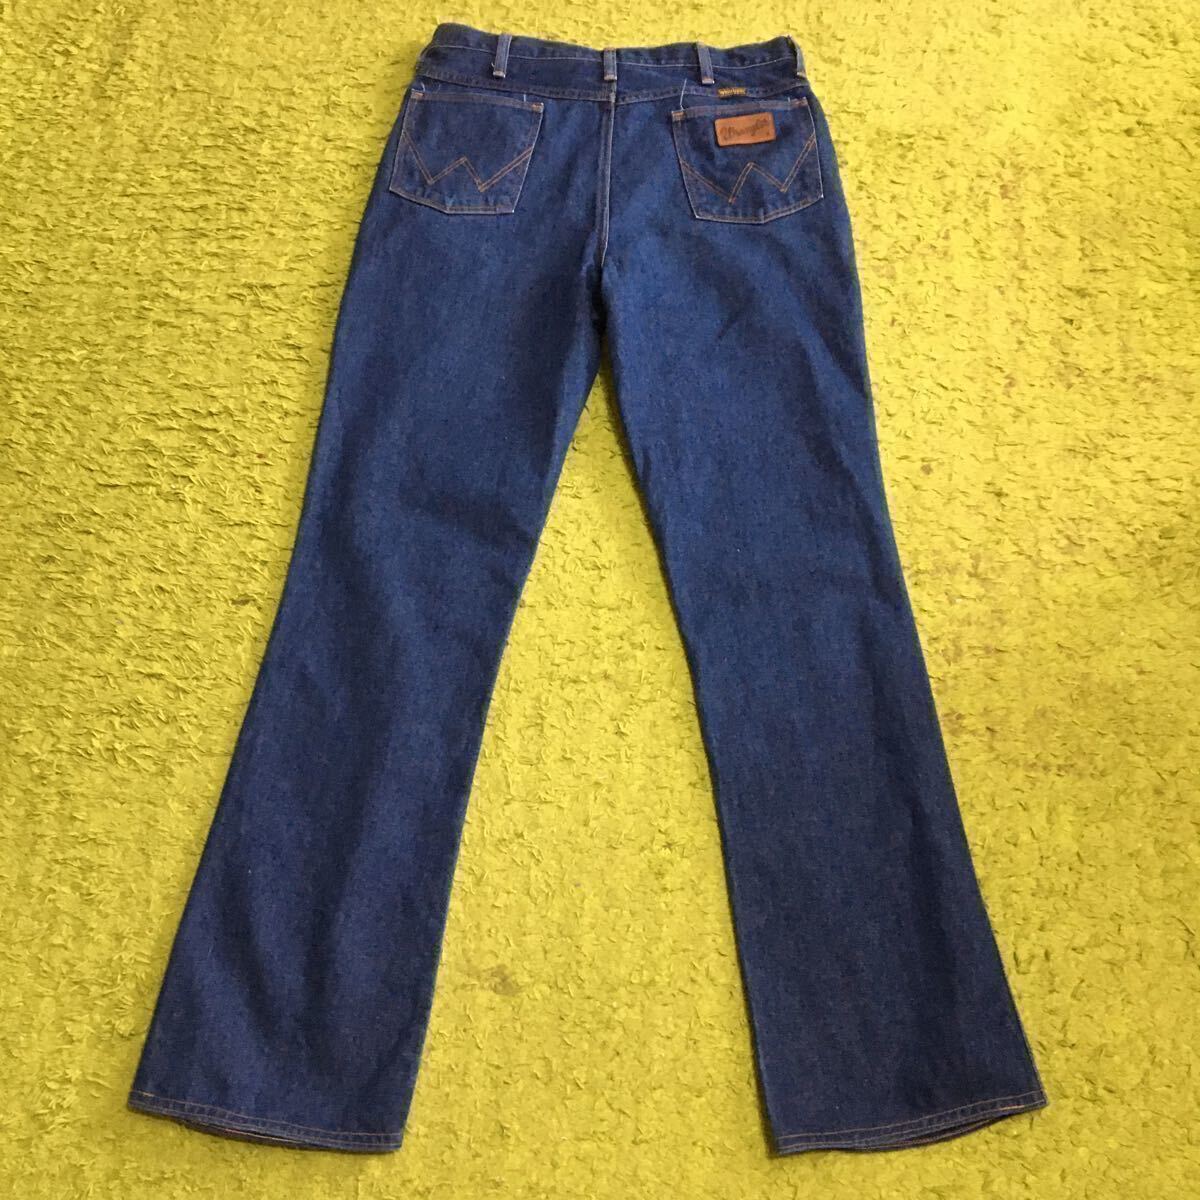 【made in USA】80's Americanclothing/Wrangler82611PW/W34L X-LONG/bootscut/stretchjeans/IDEALbrasszipper/刻印L3S/濃紺/極上品/_画像2